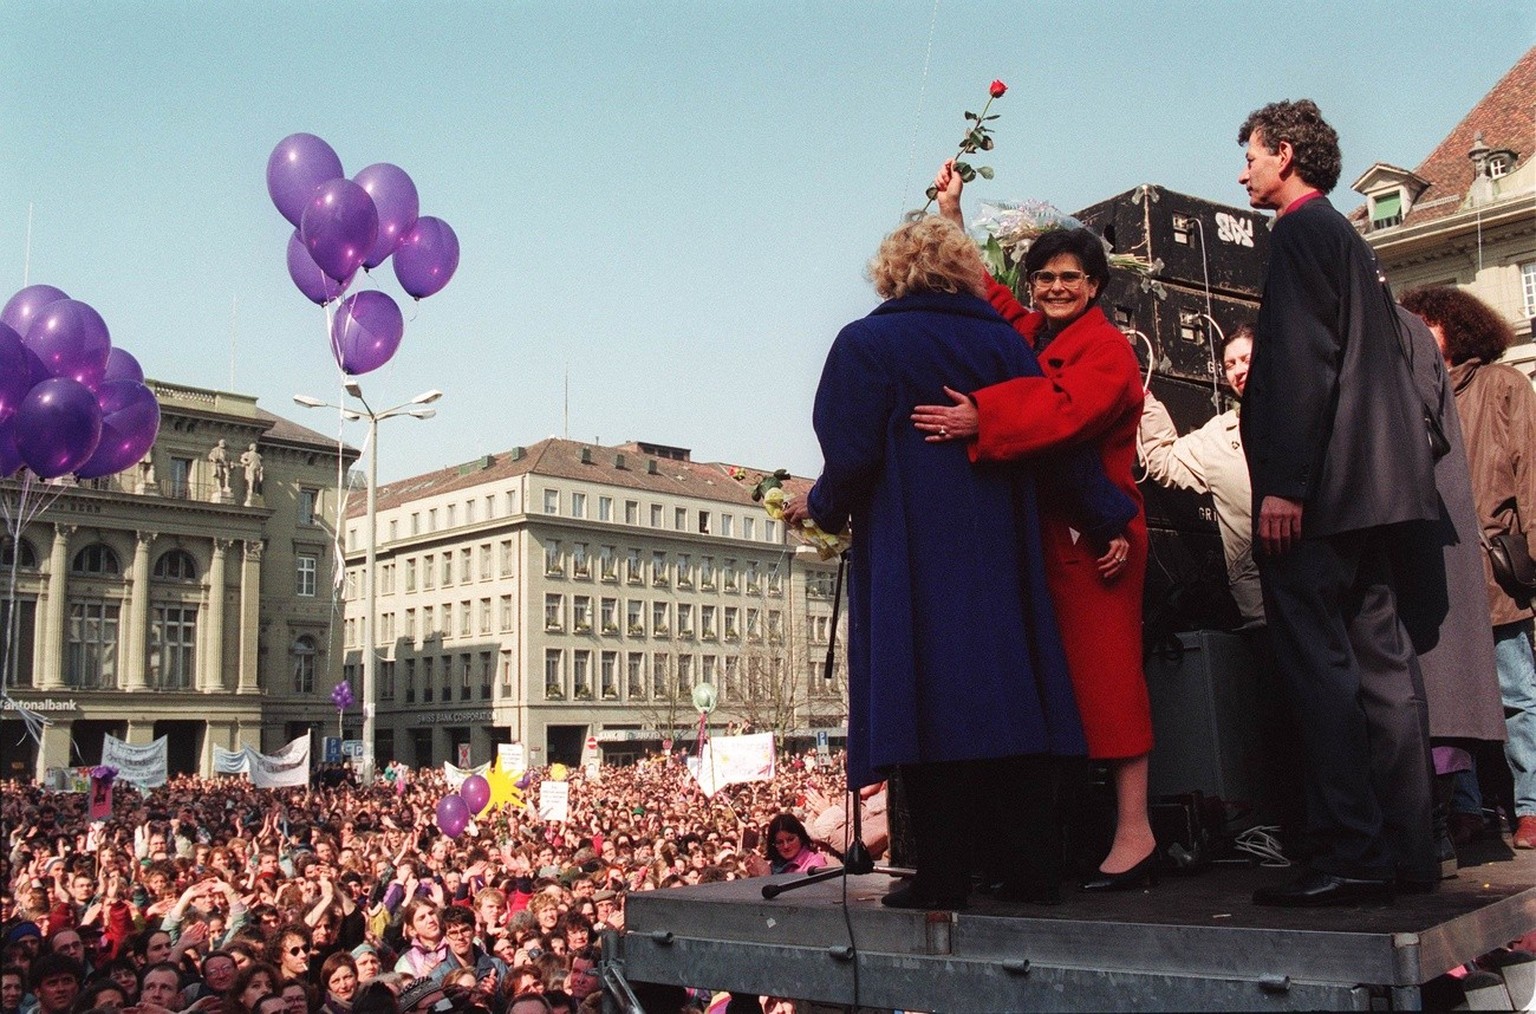 On March 10, 1993, the two members of the Social Democratic Party of Switzerland, newly elected member of government Ruth Dreifuss together with Christiane Brunner, who was the party's favourite candi ...